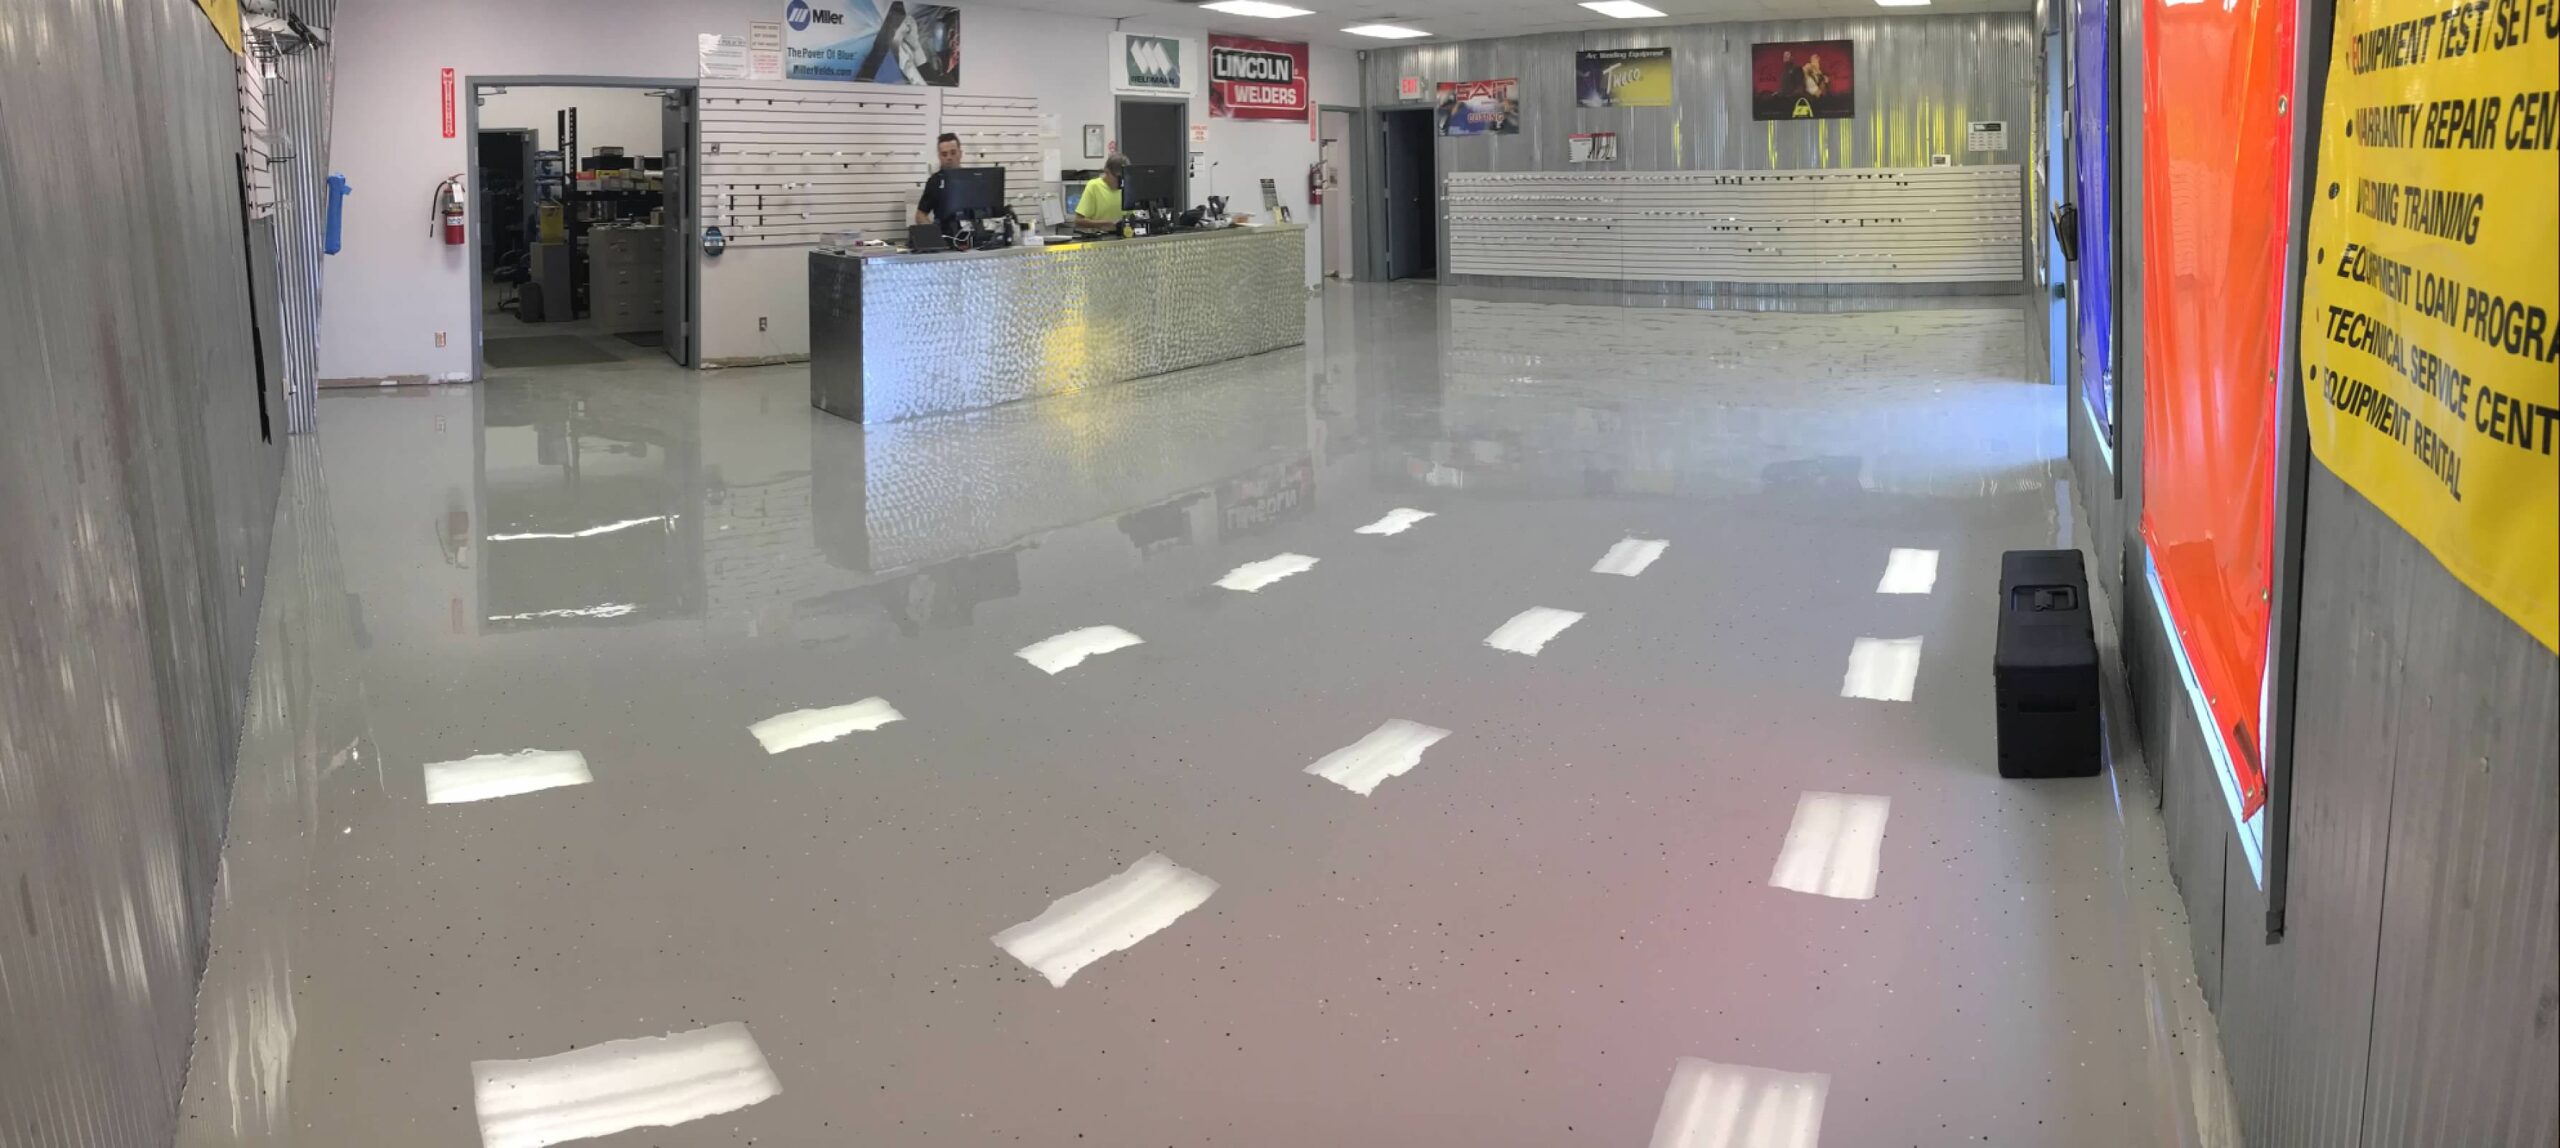 Coated floor with a man working at a register in the background